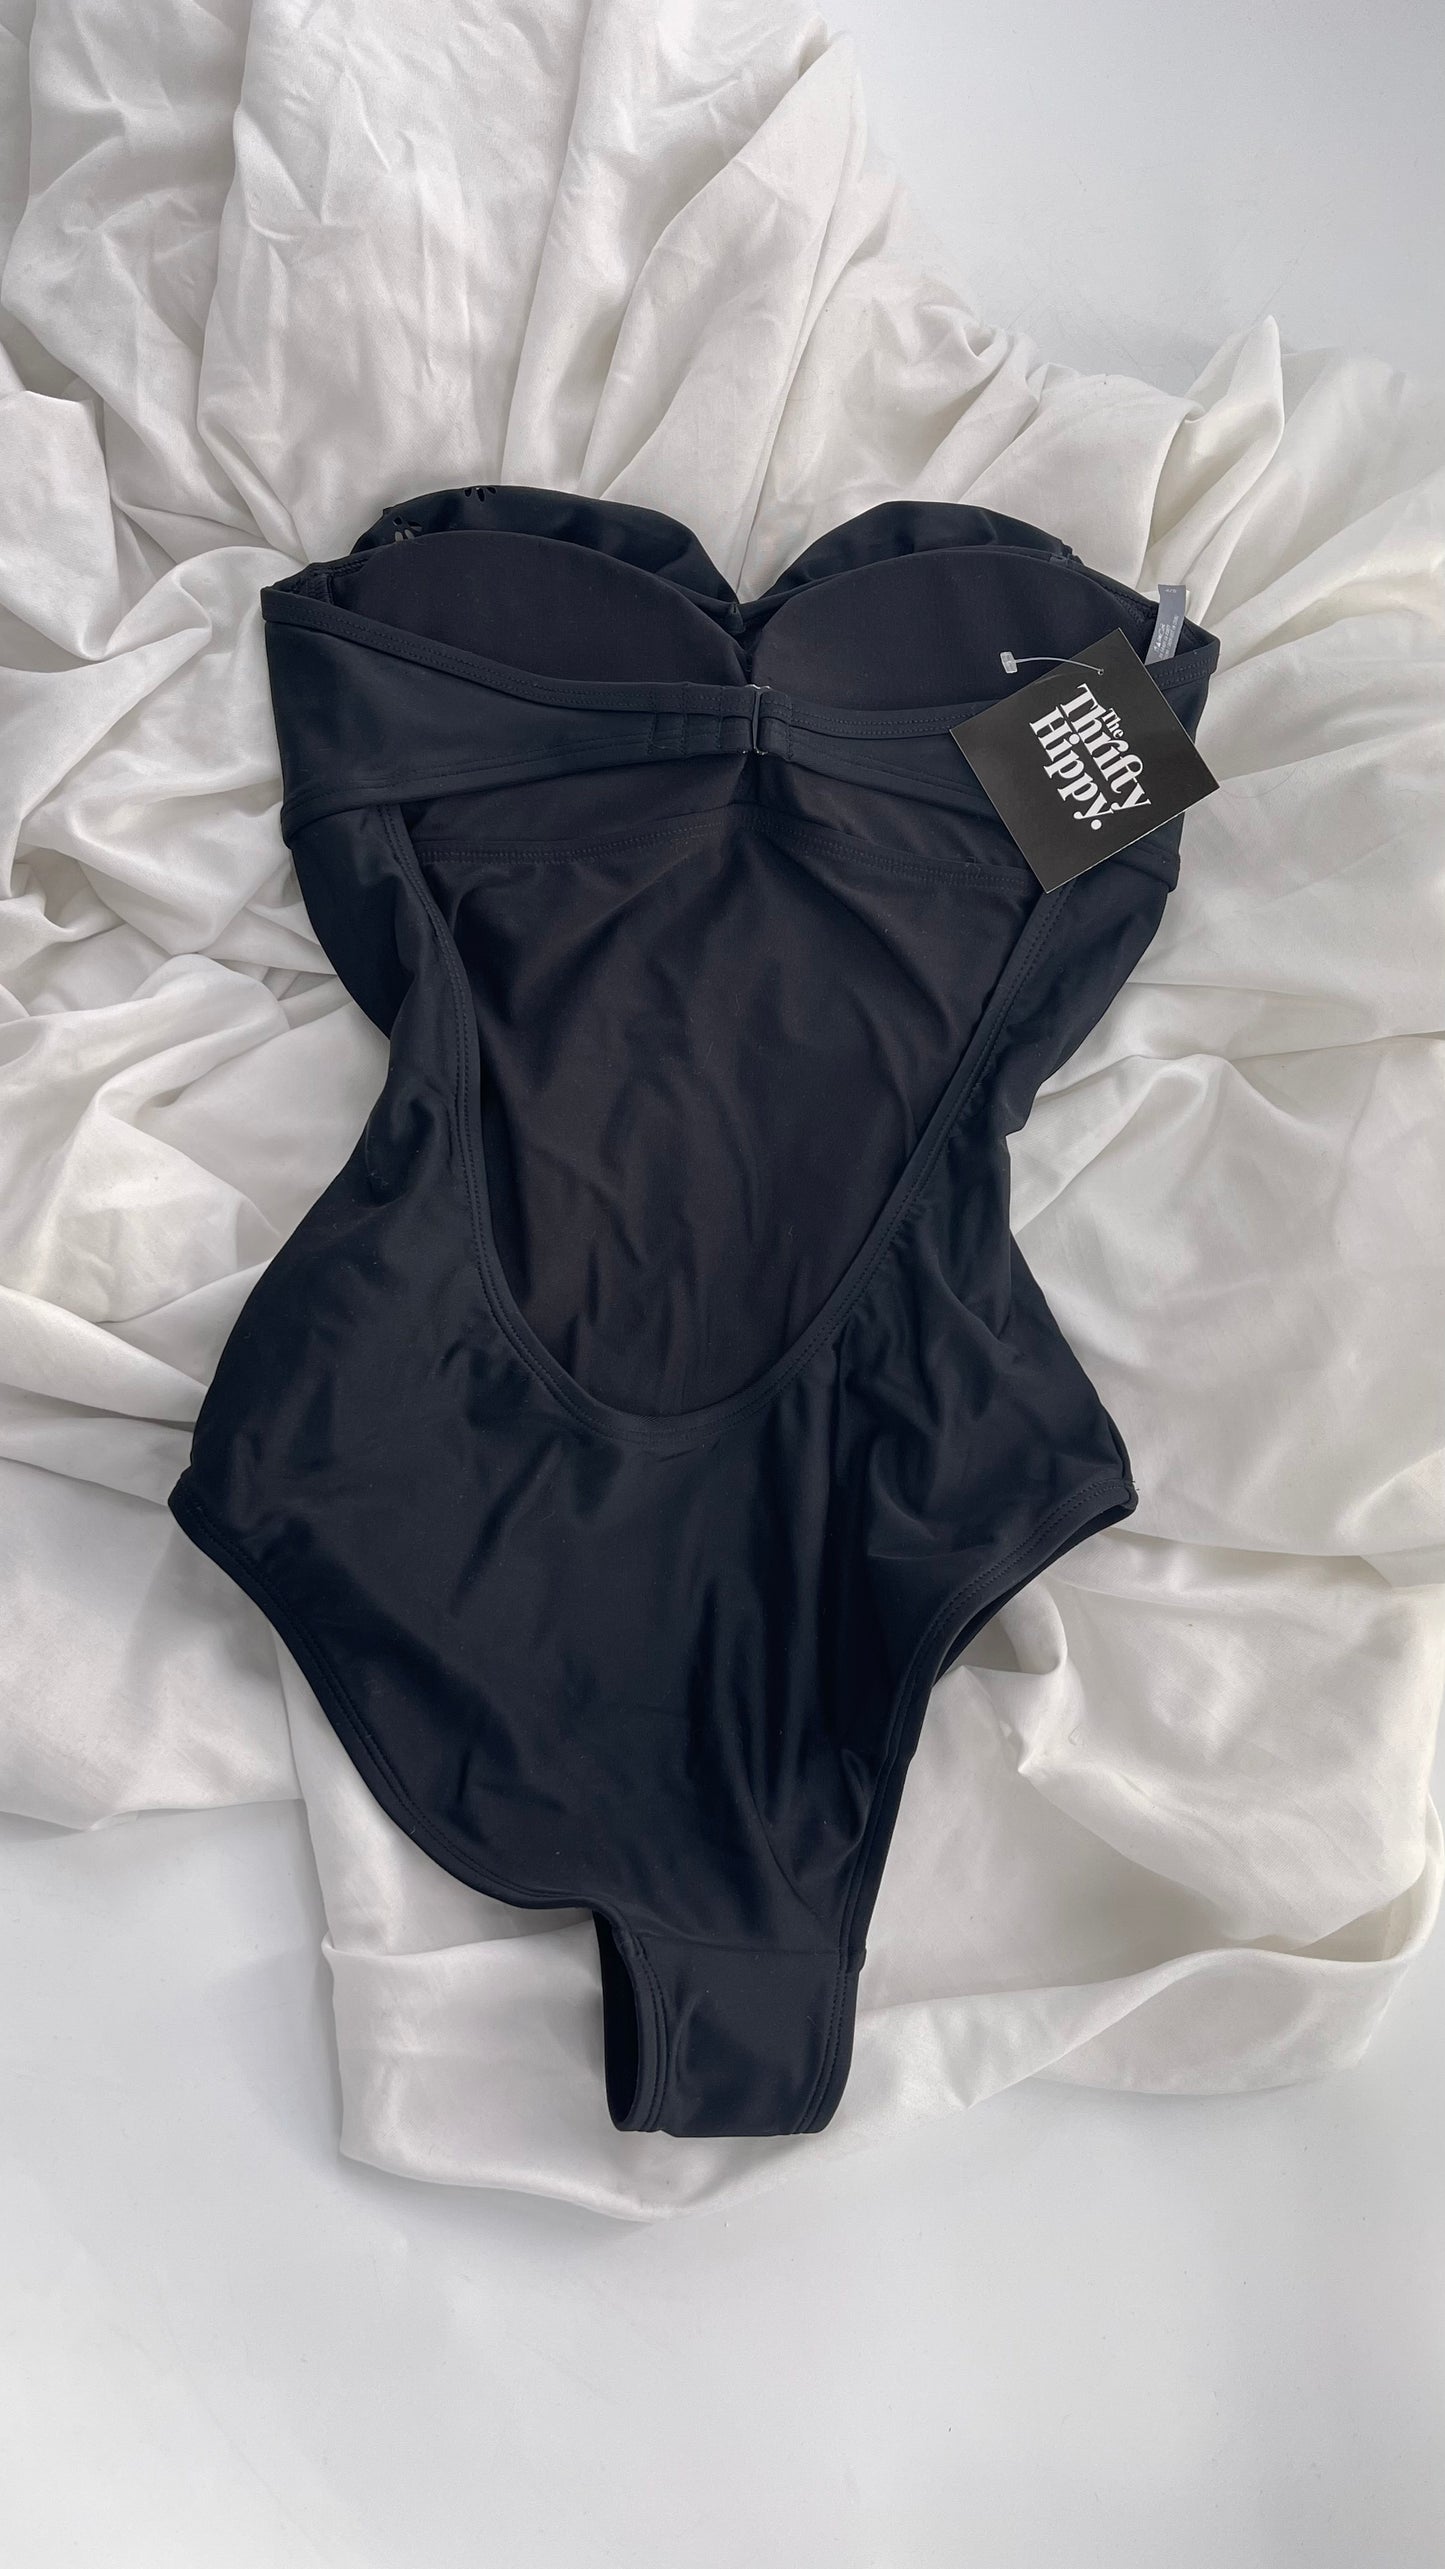 AERIE Black Swimsuit with Ruffled Sweetheart Neckline and Open Back (Small)